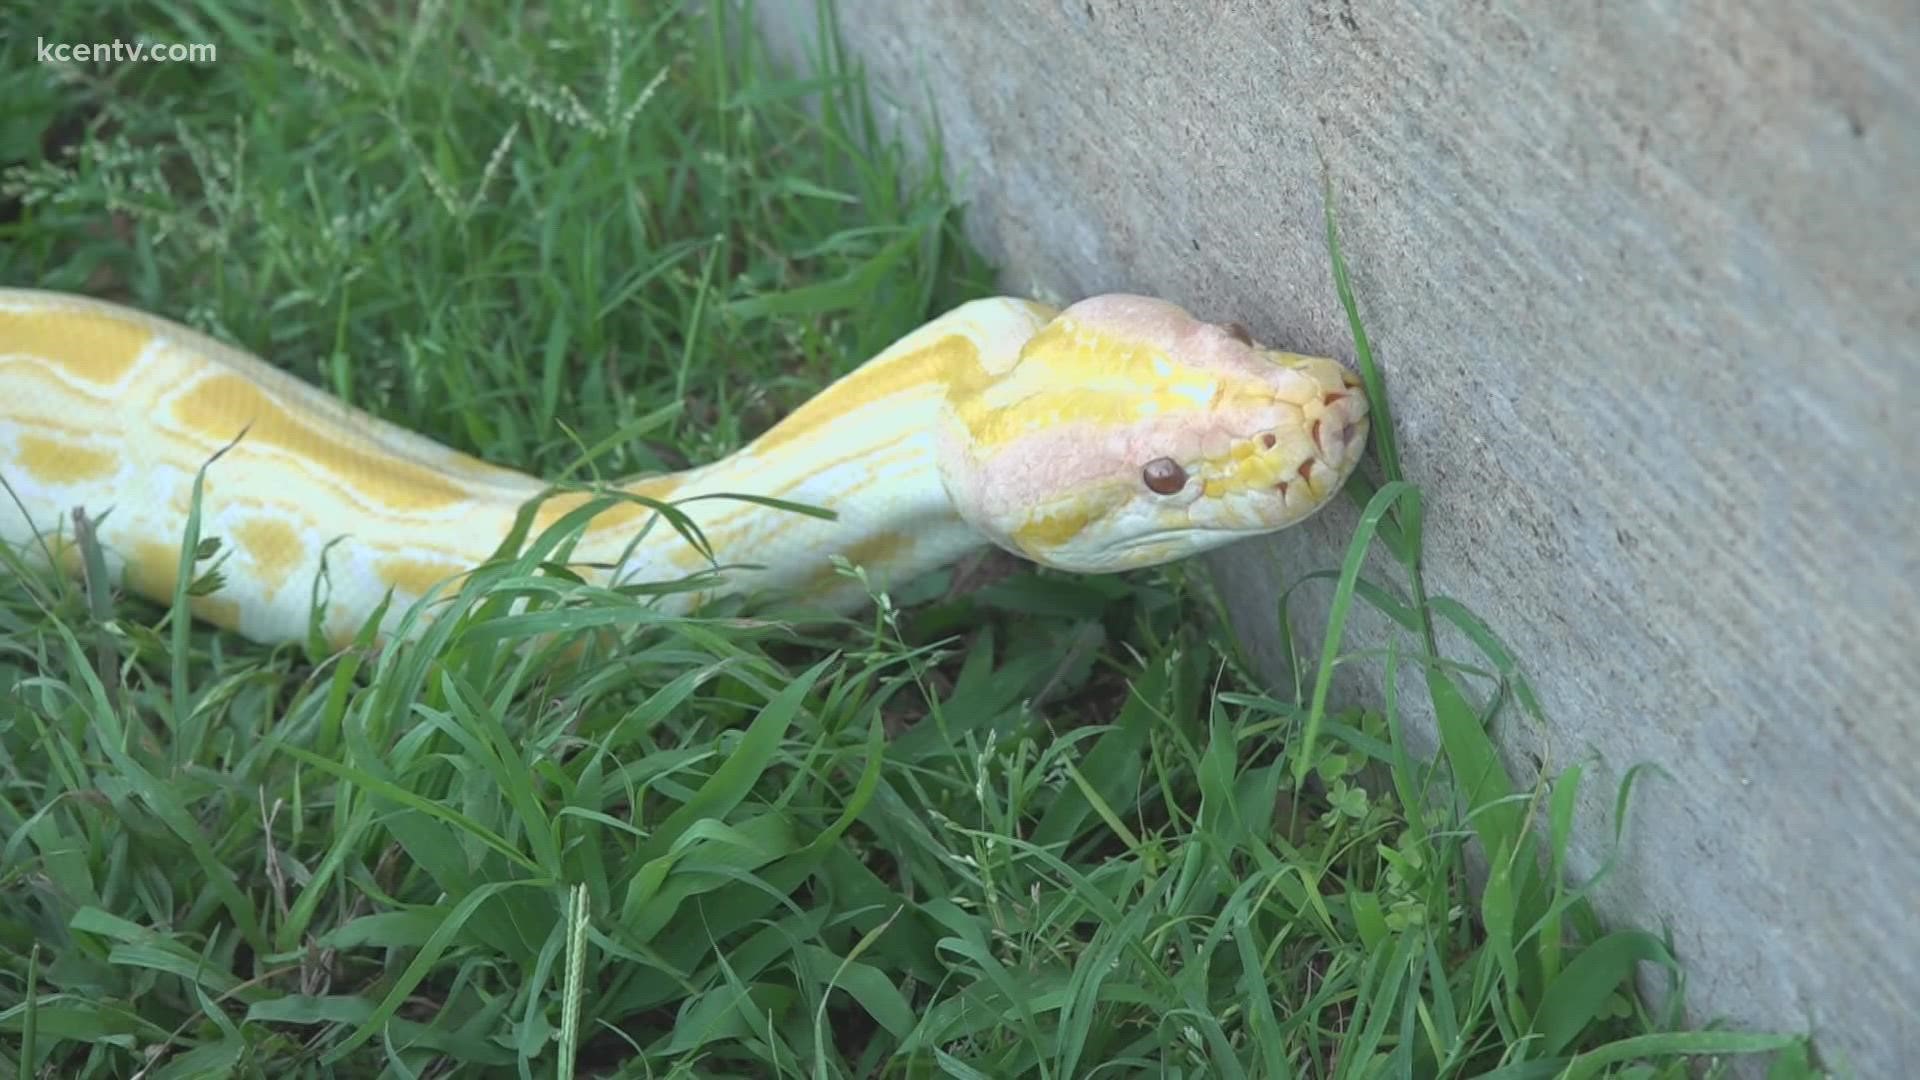 Here is how to avoid snake trouble this Summer.